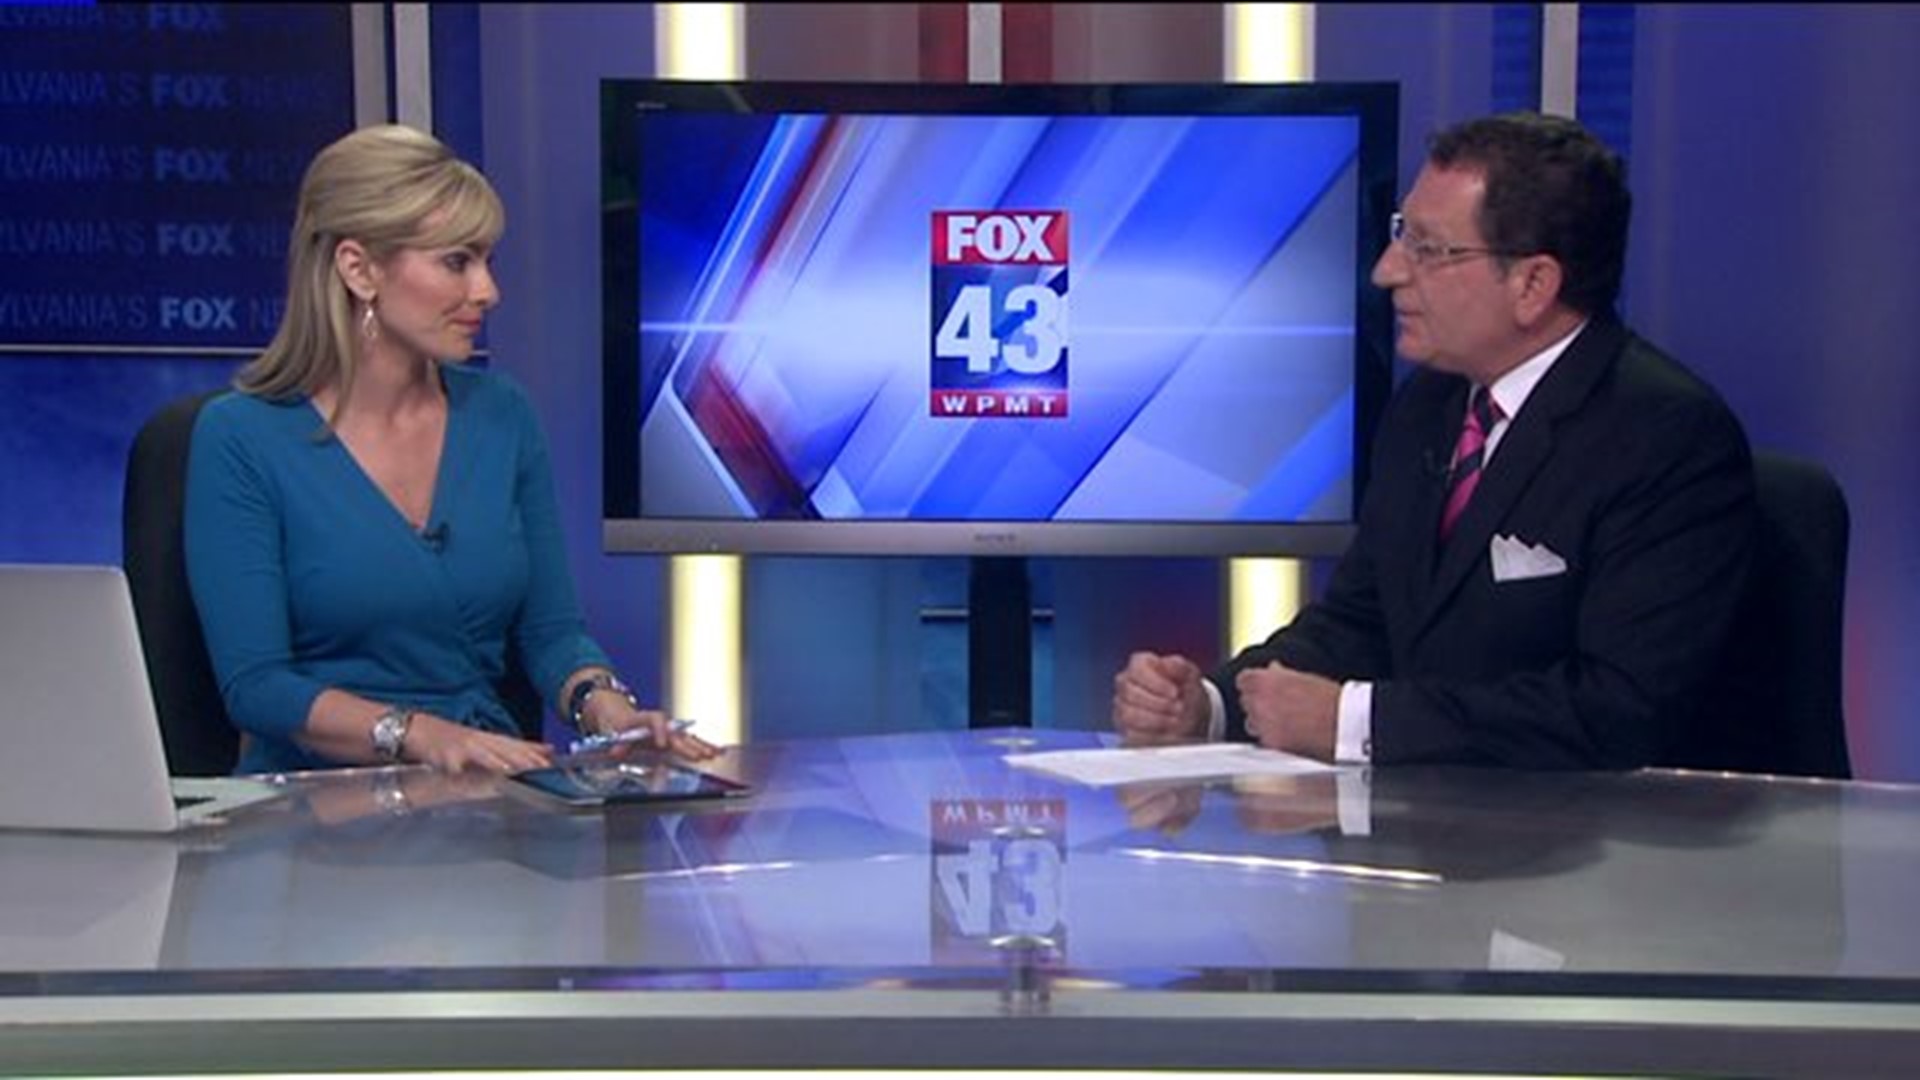 Fox43 Legal Analyst Steven Breit Weighs in on the Ray Rice Case